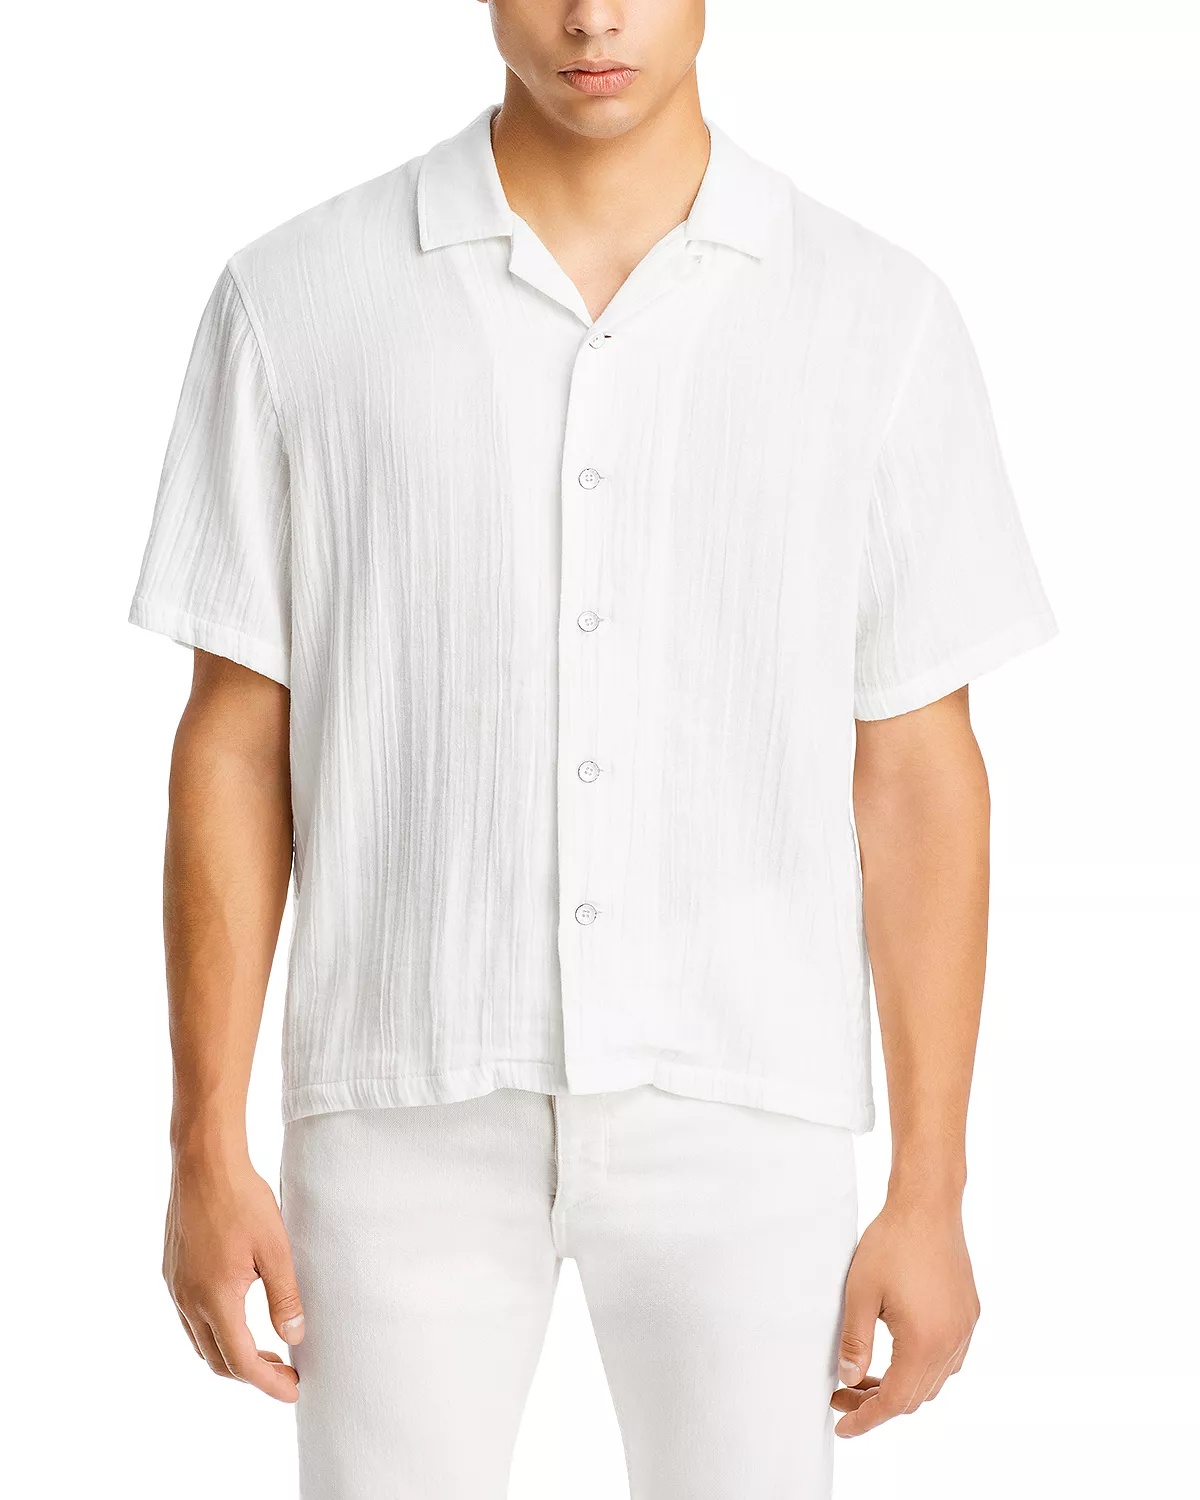 Avery Cotton Gauze Relaxed Fit Button Down Camp Shirt - 3